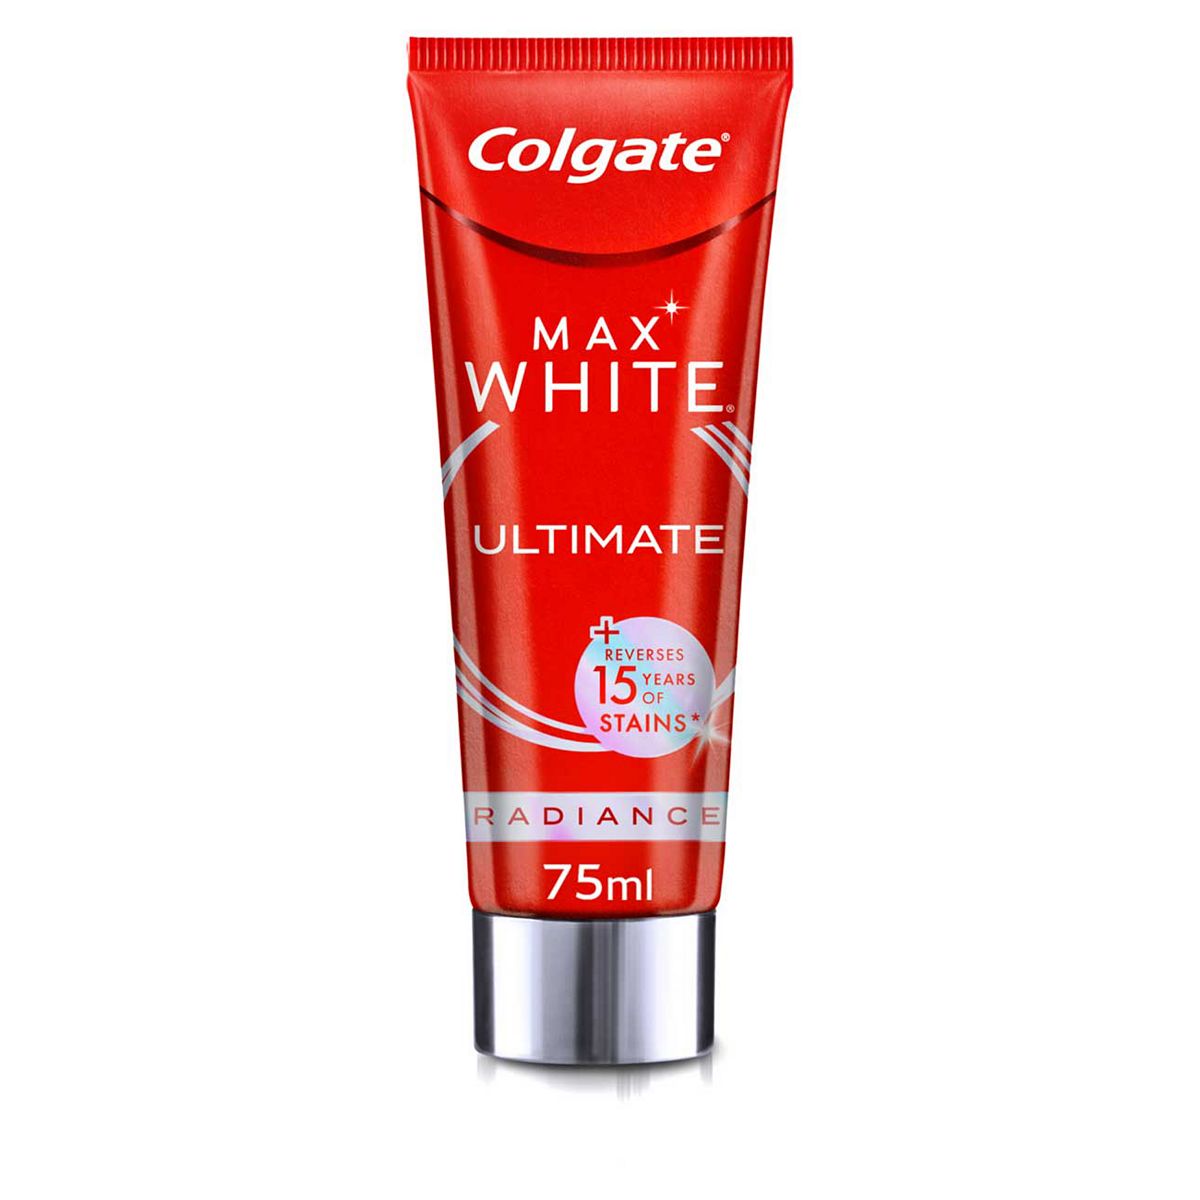 Colgate Max White Ultimate Radiance Whitening Toothpaste 75ml GOODS Boots   